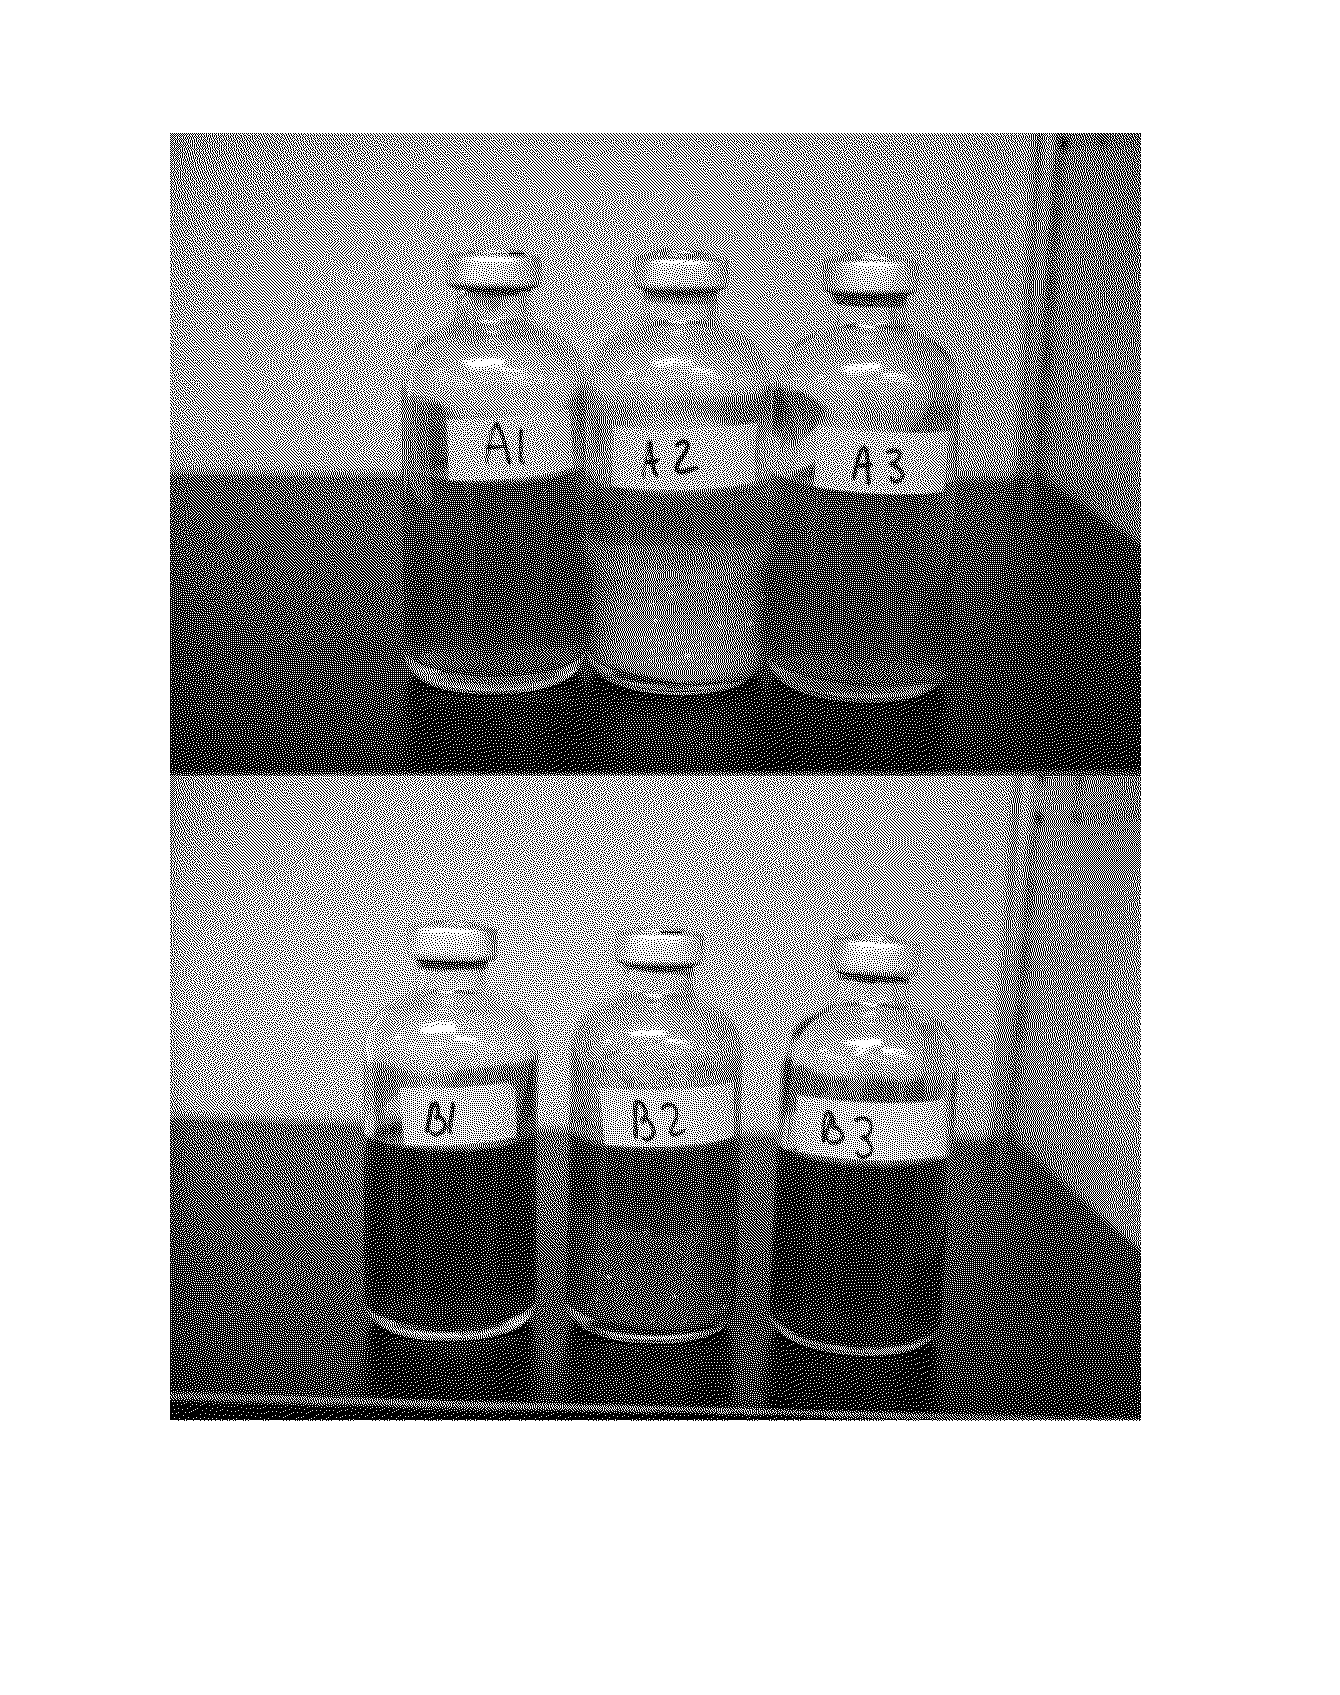 Liquids and Foodstuffs Containing beta-hydroxy-beta-methylbutyrate (HMB) in the Free Acid Form and Methods of Manufacturing or Producing the Same